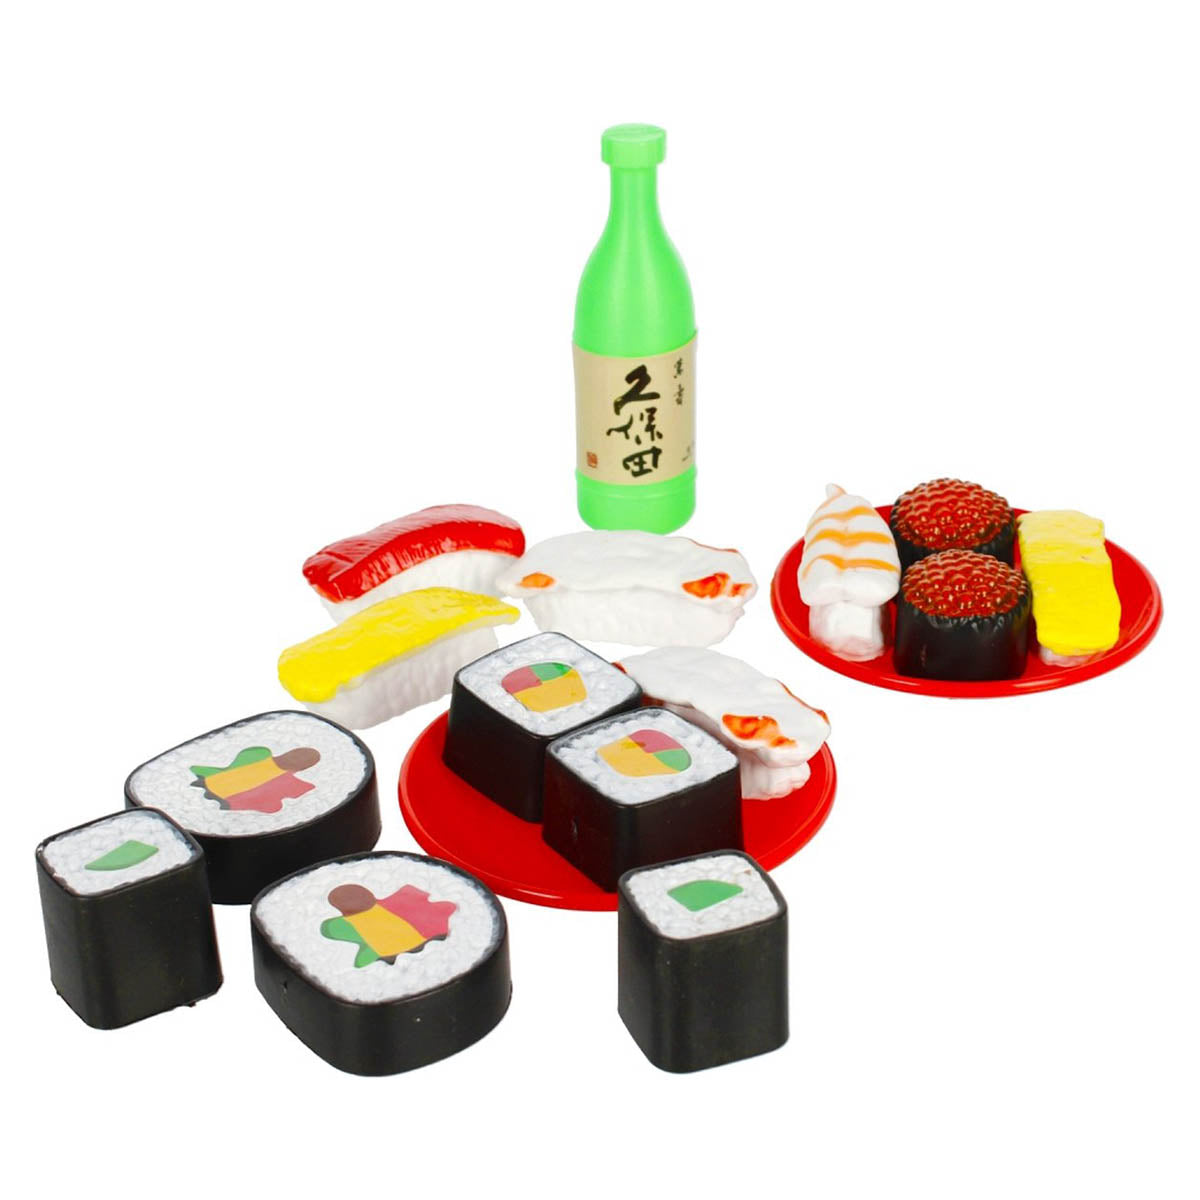 <tc>Ariko</tc> toy sushi set - with cutlery, tray and soy container